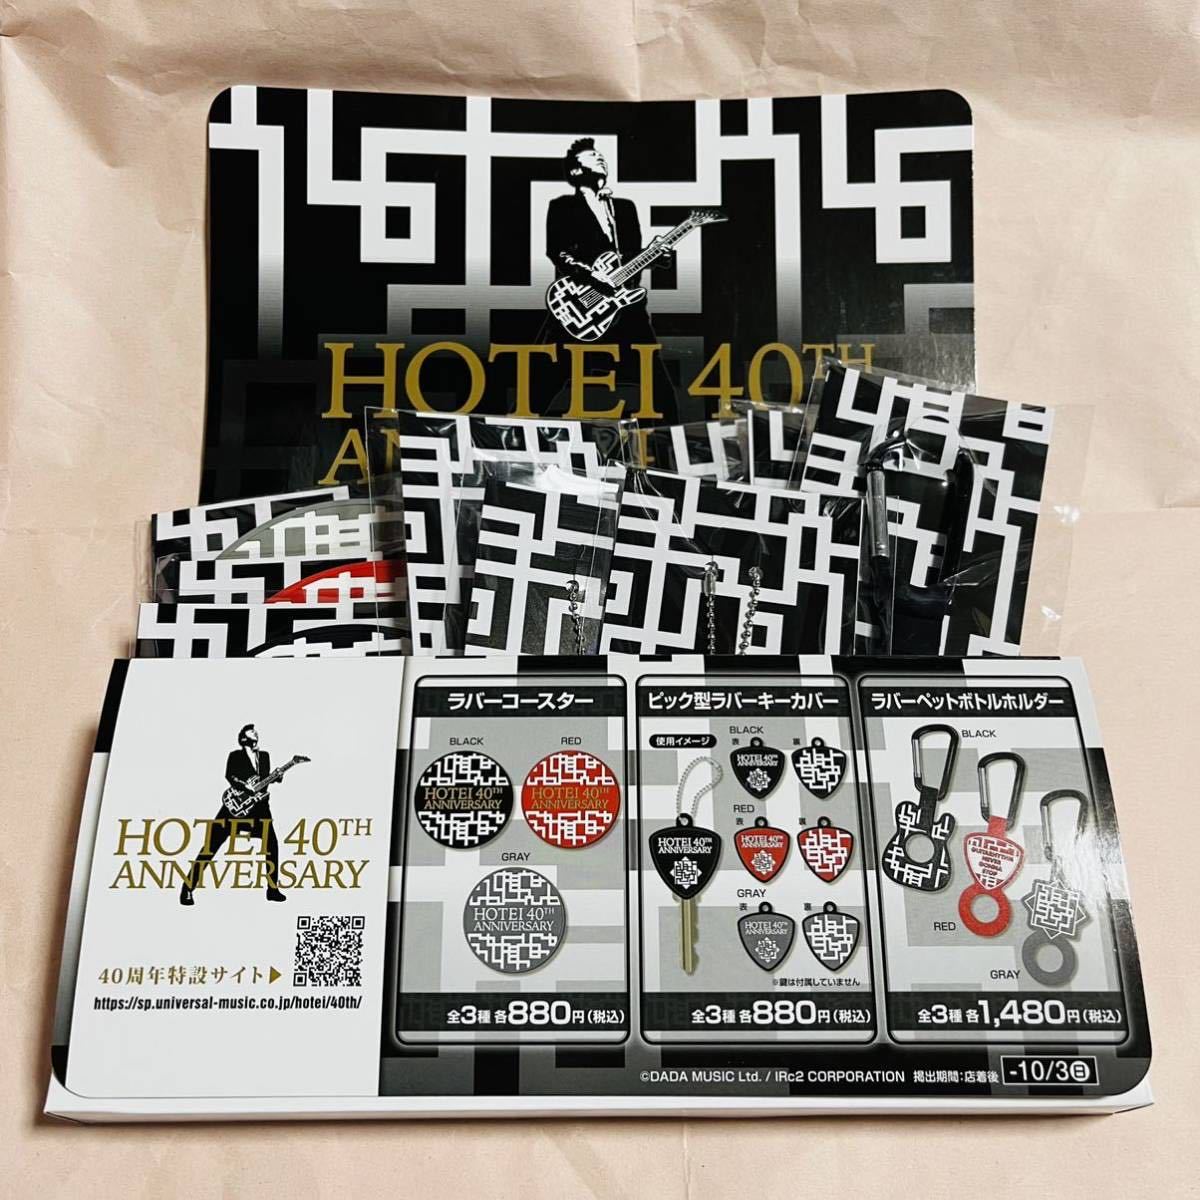 HOTEI 40th ANNIVERSARY ローソン限定グッズ 9点フルセット 店頭展示用 